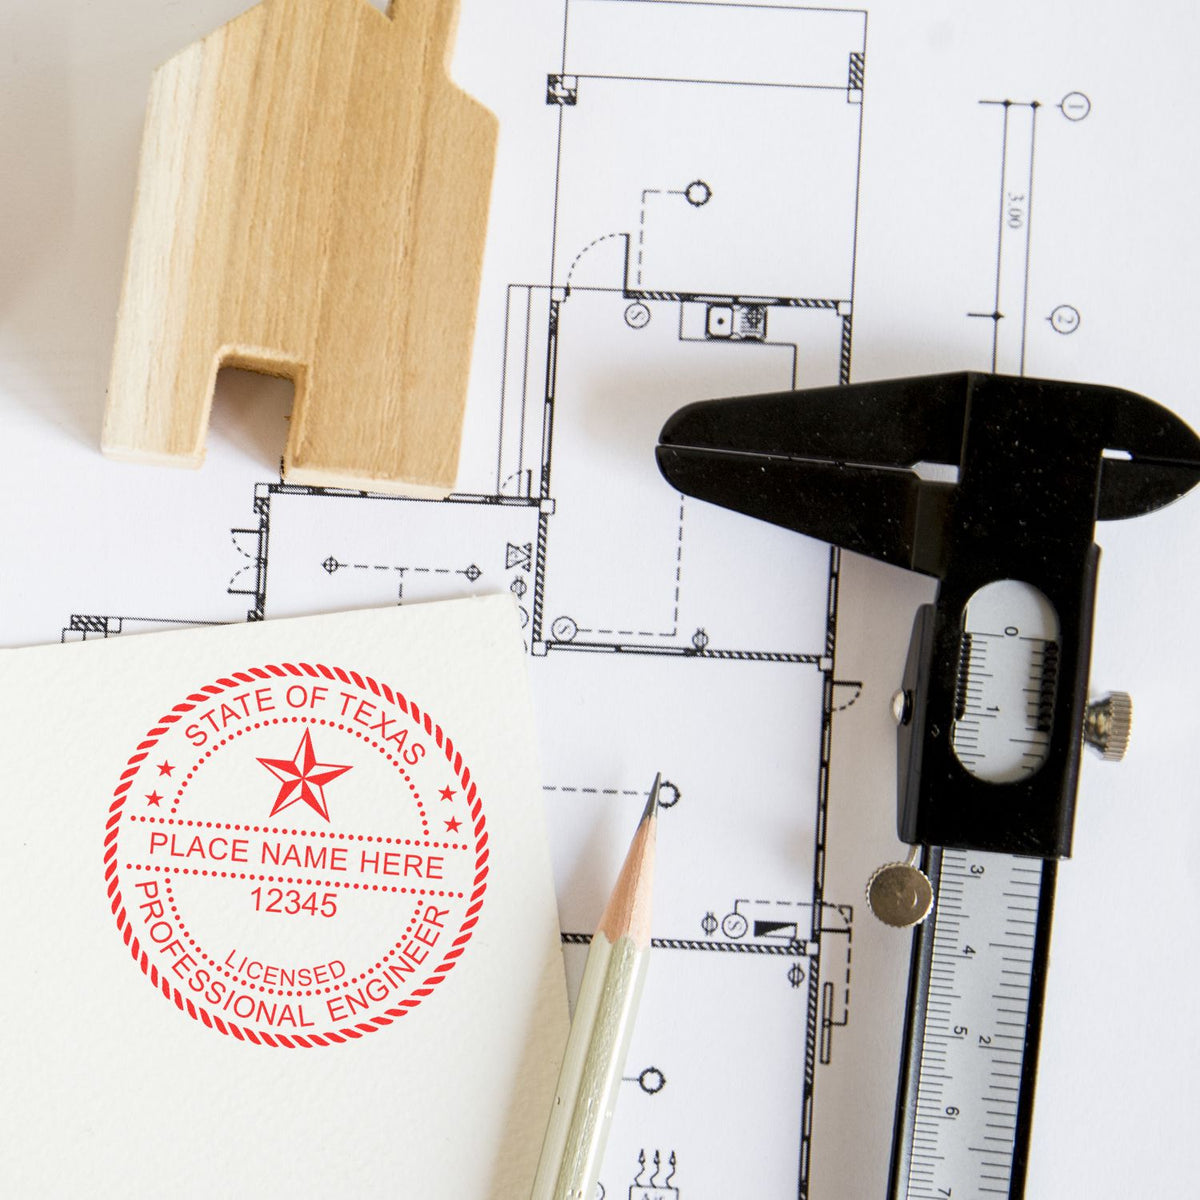 A stamped impression of the Texas Professional Engineer Seal Stamp in this stylish lifestyle photo, setting the tone for a unique and personalized product.